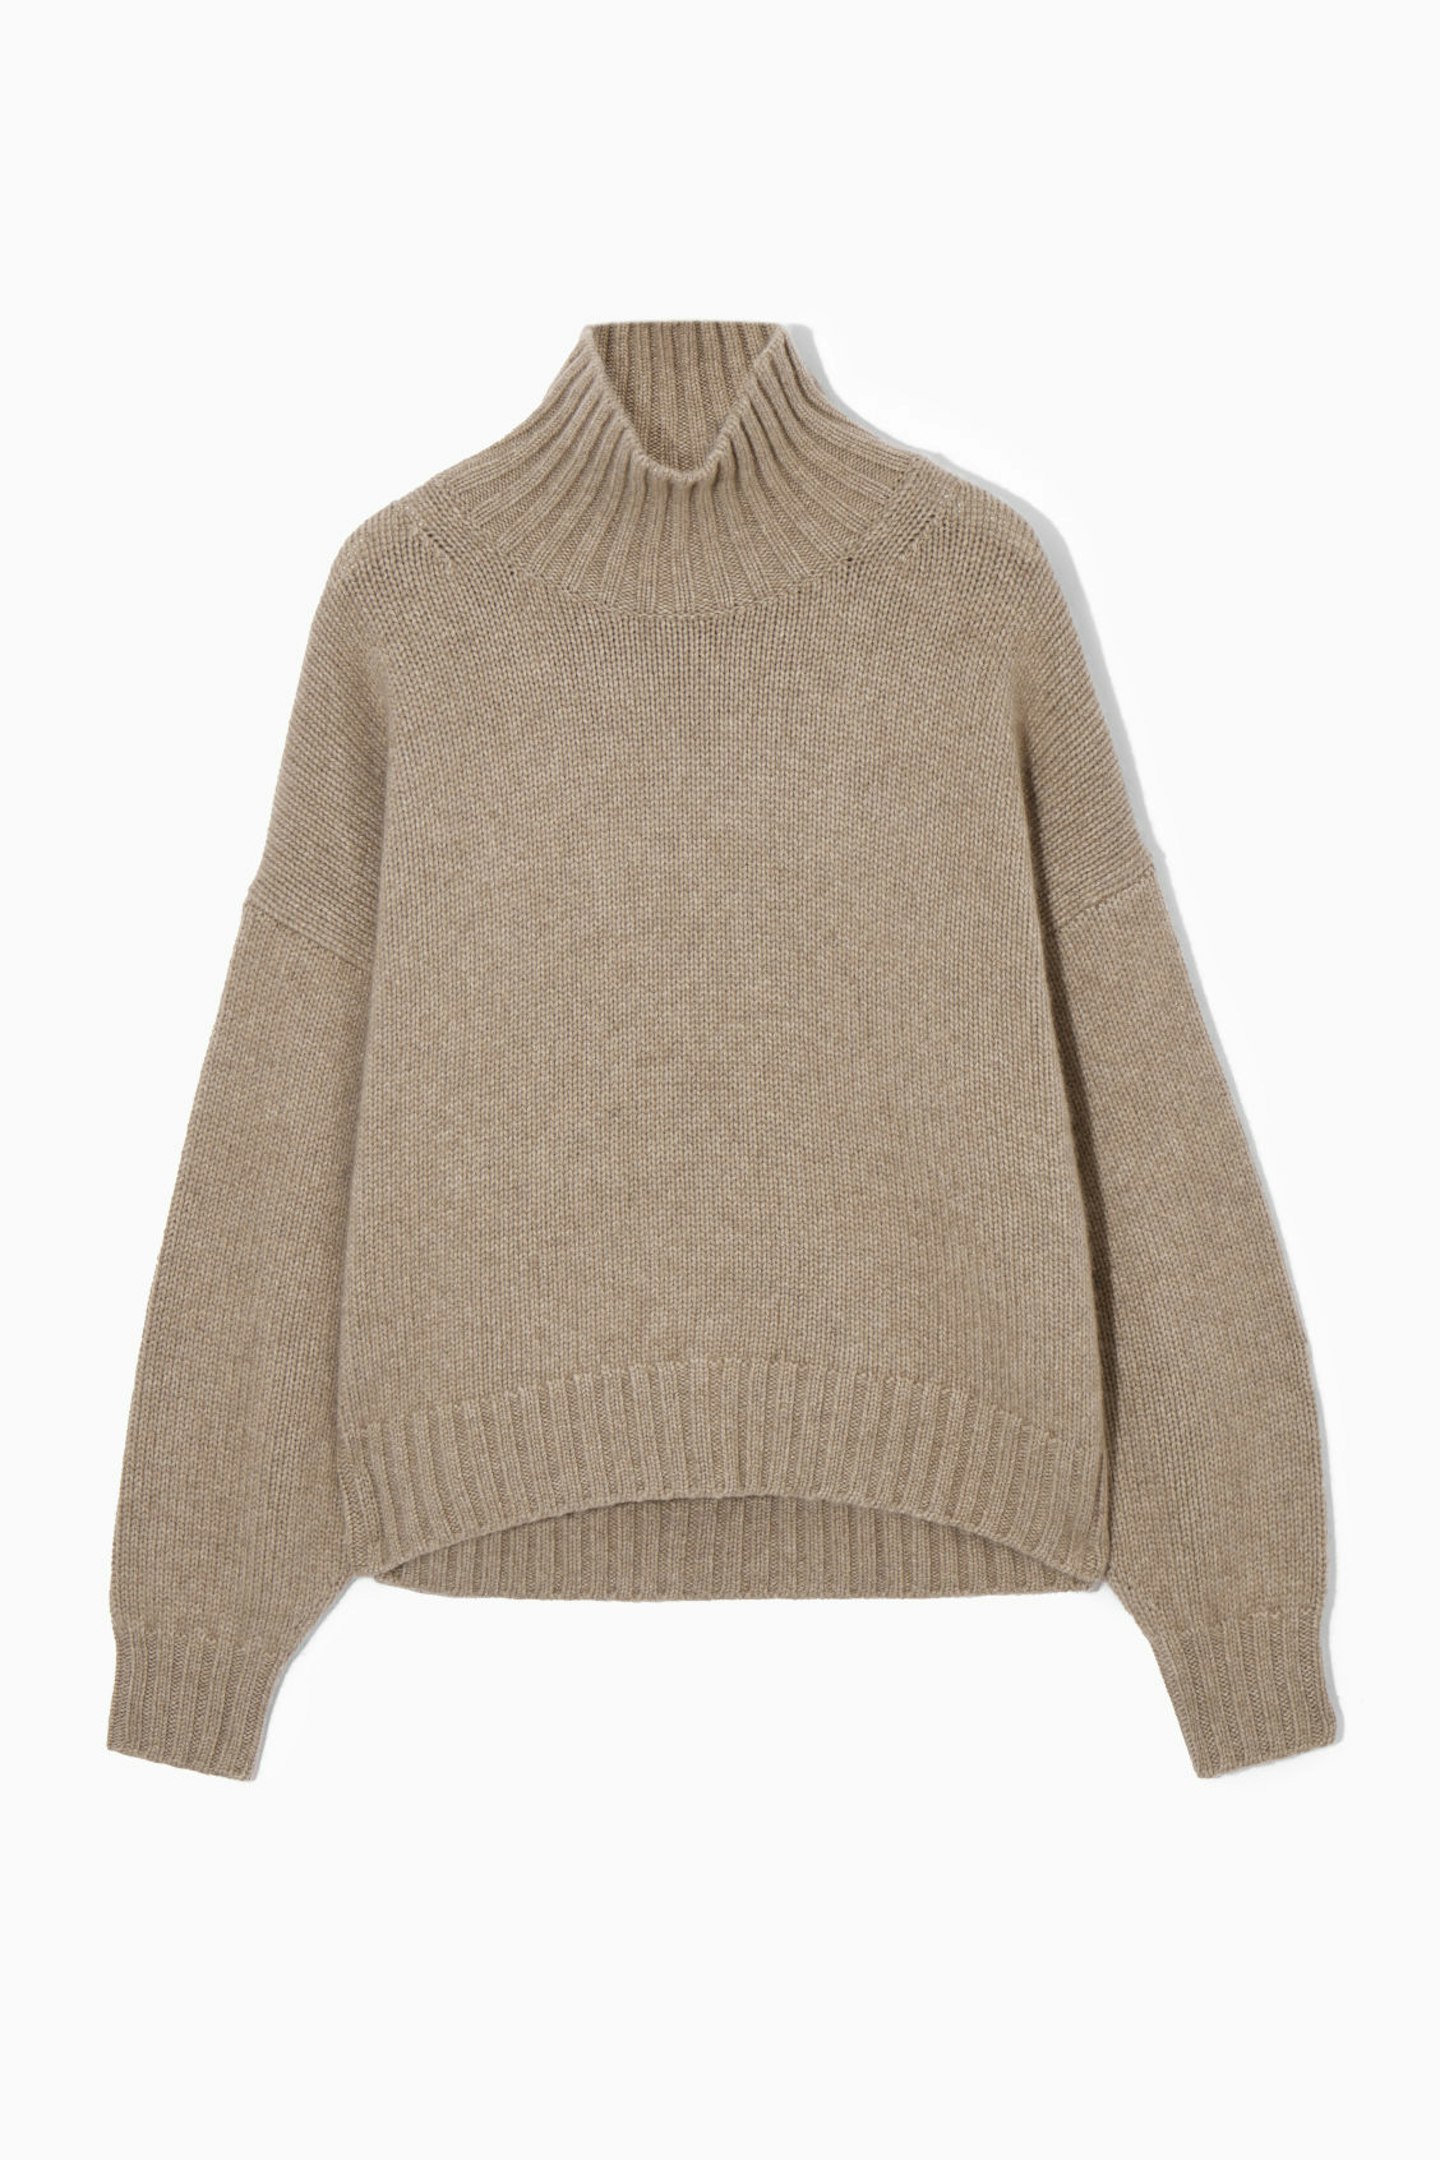 Shop The Best Jumpers And Knitwear For Women 2023